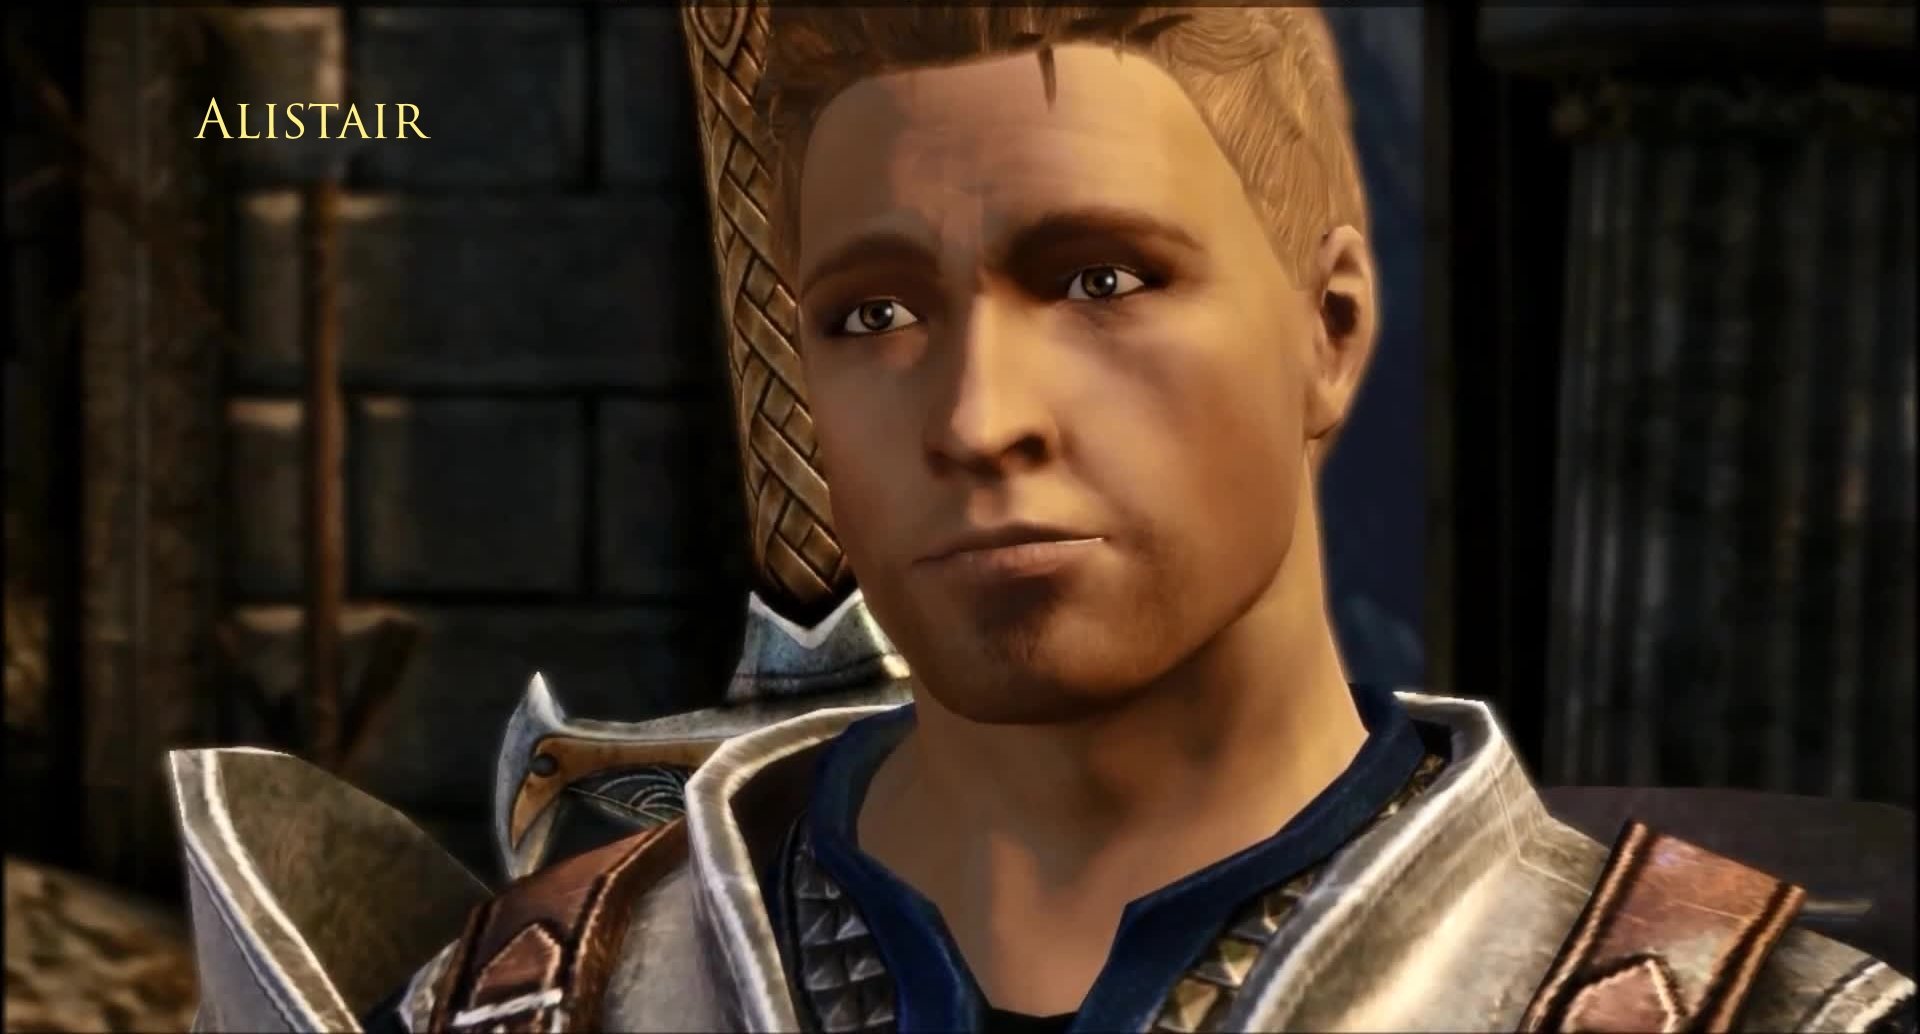 Alistair is the awkwardly witty and slightly charming man of the story.